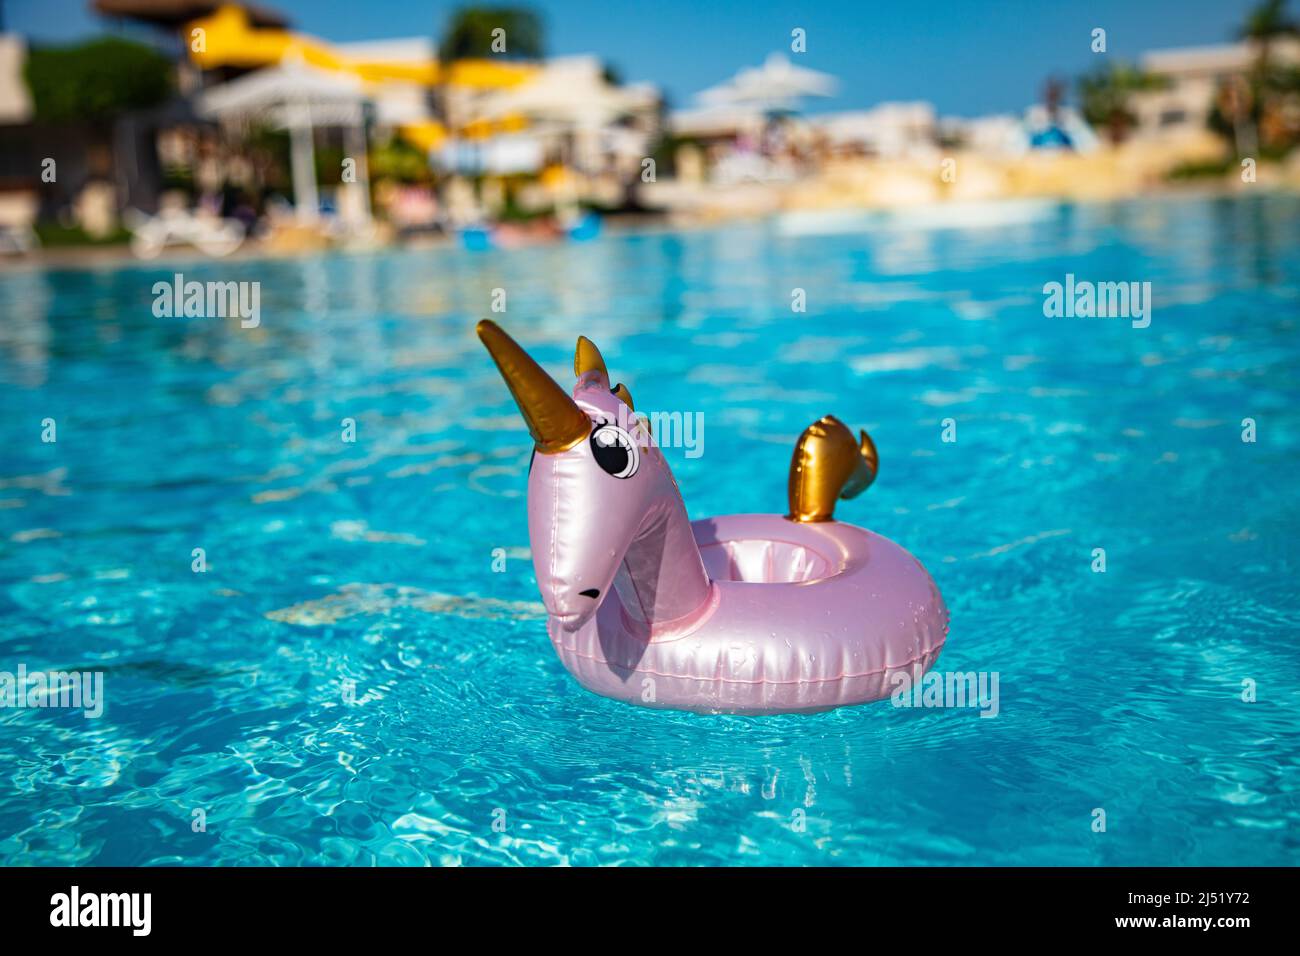 Unicorn inflatable drink holder with cocktail for design purpose Stock Photo